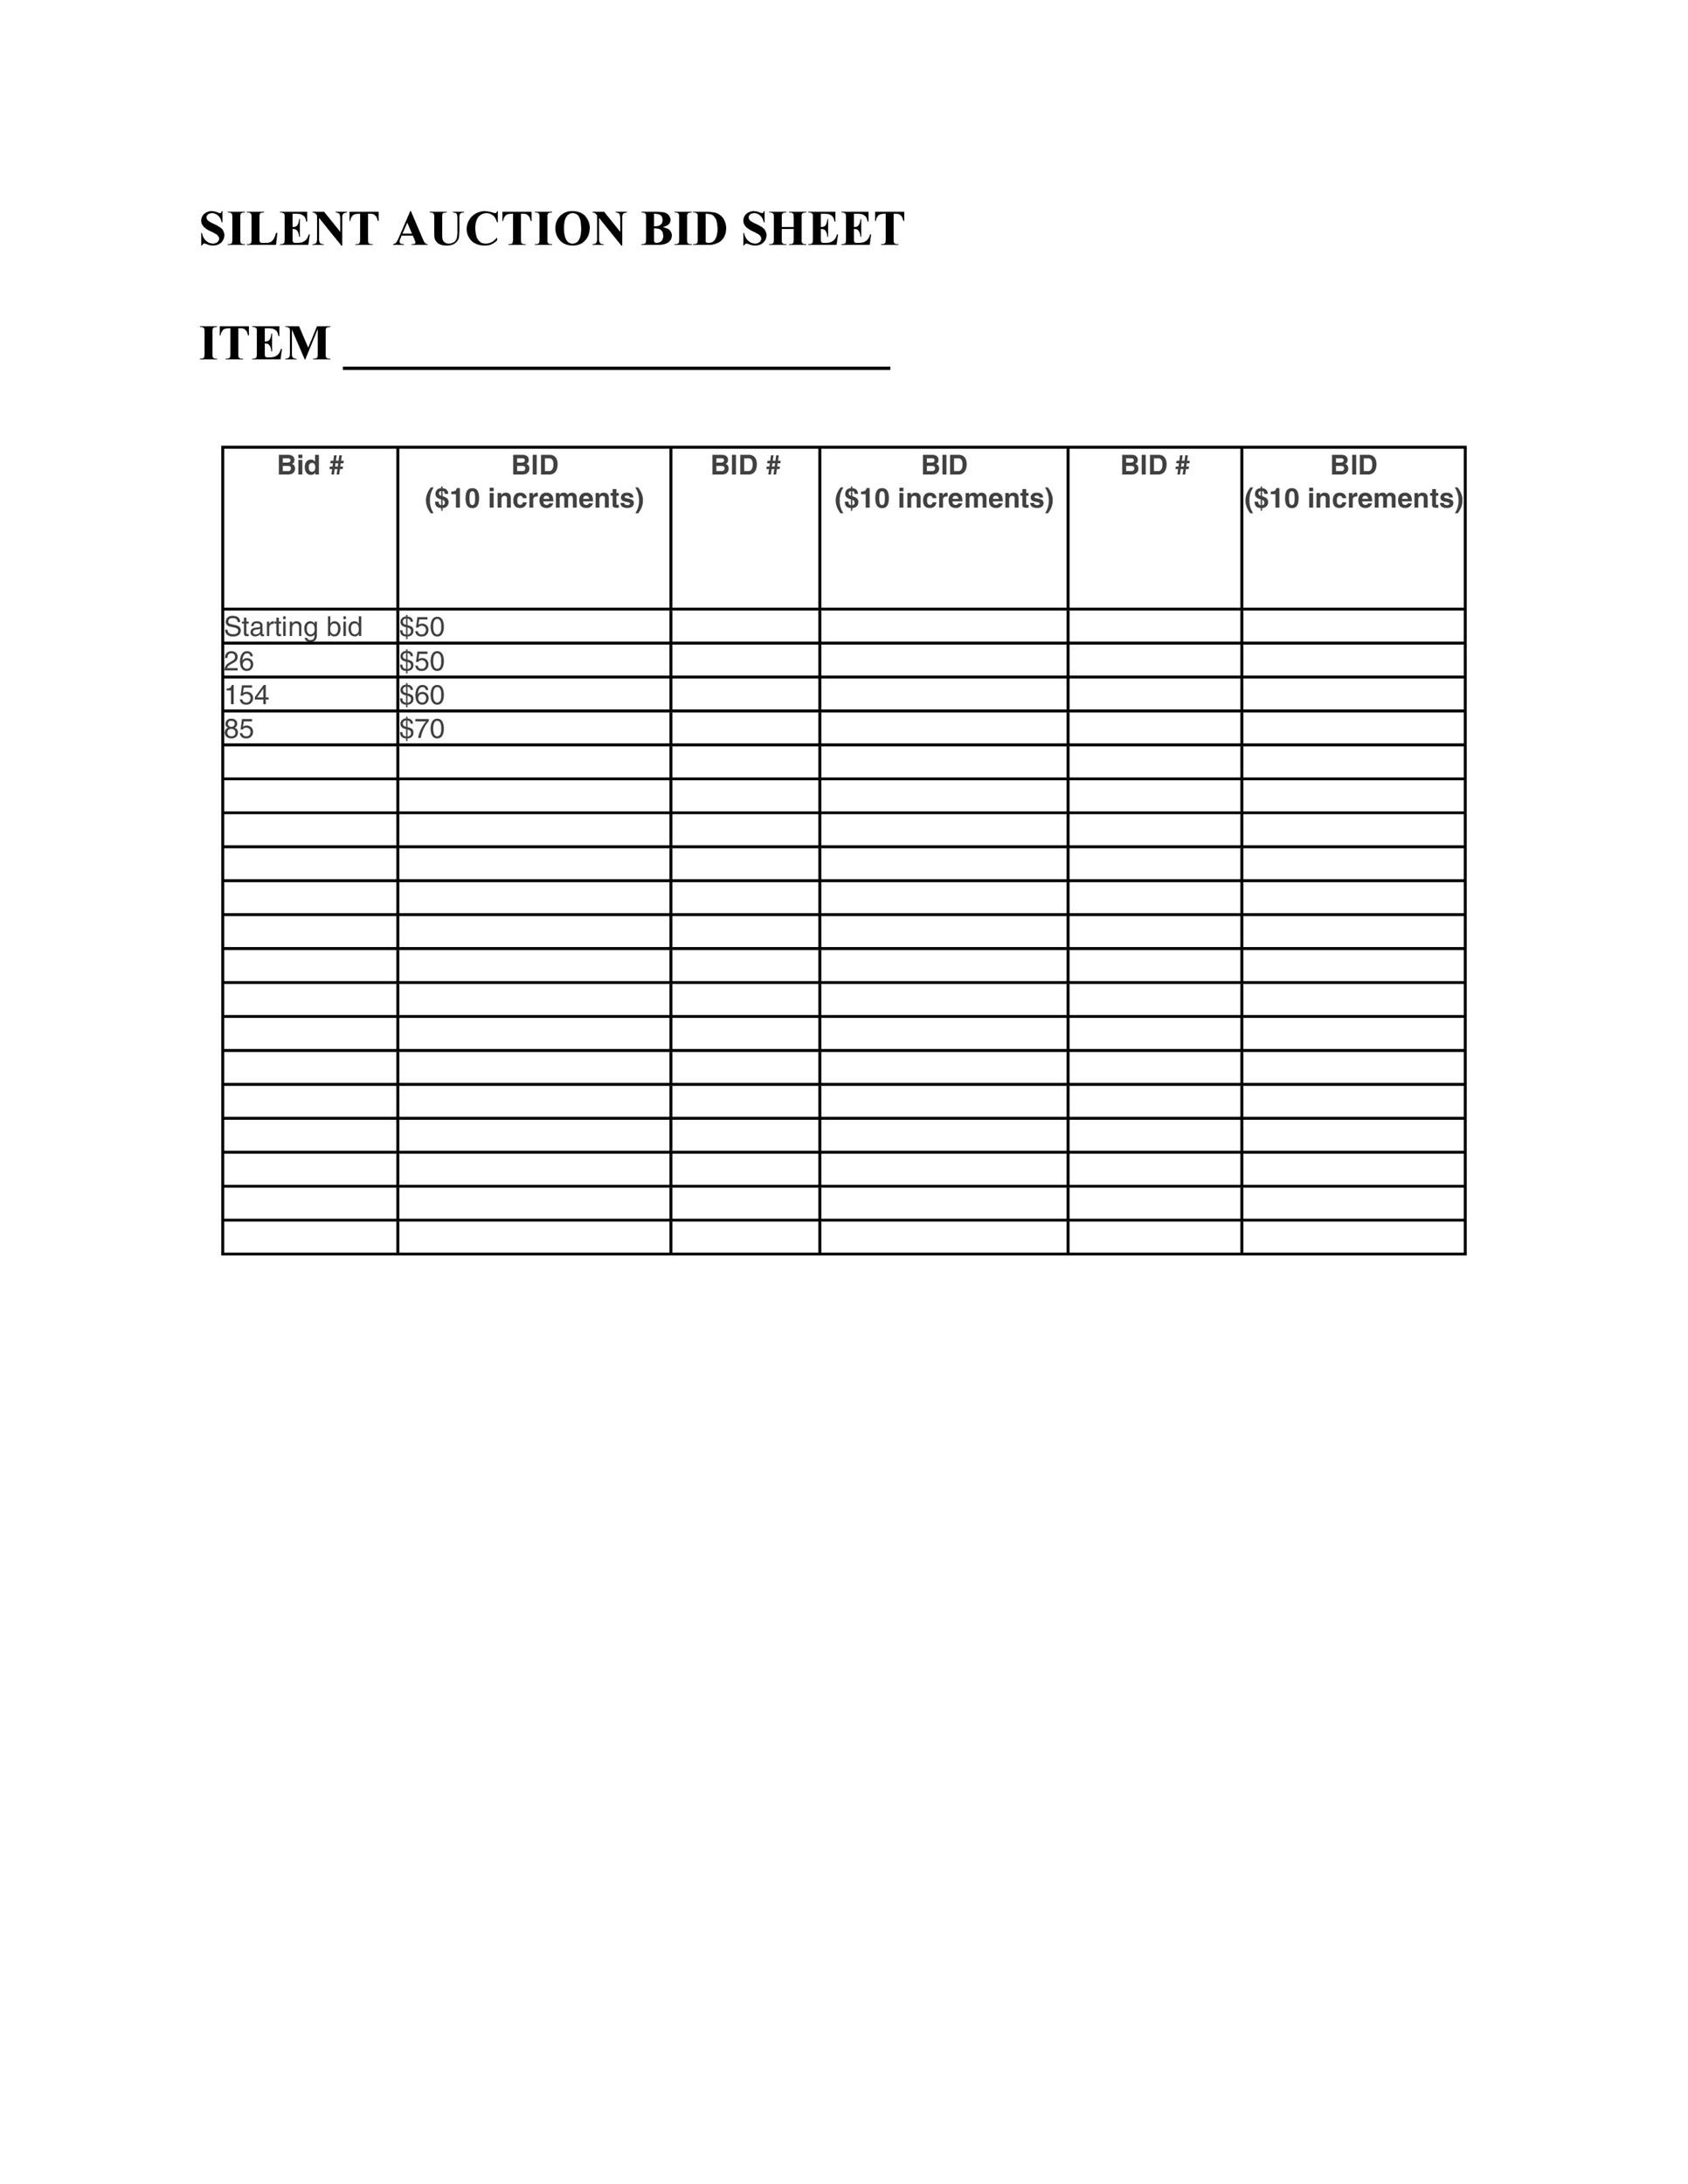 40-silent-auction-bid-sheet-templates-word-excel-template-lab